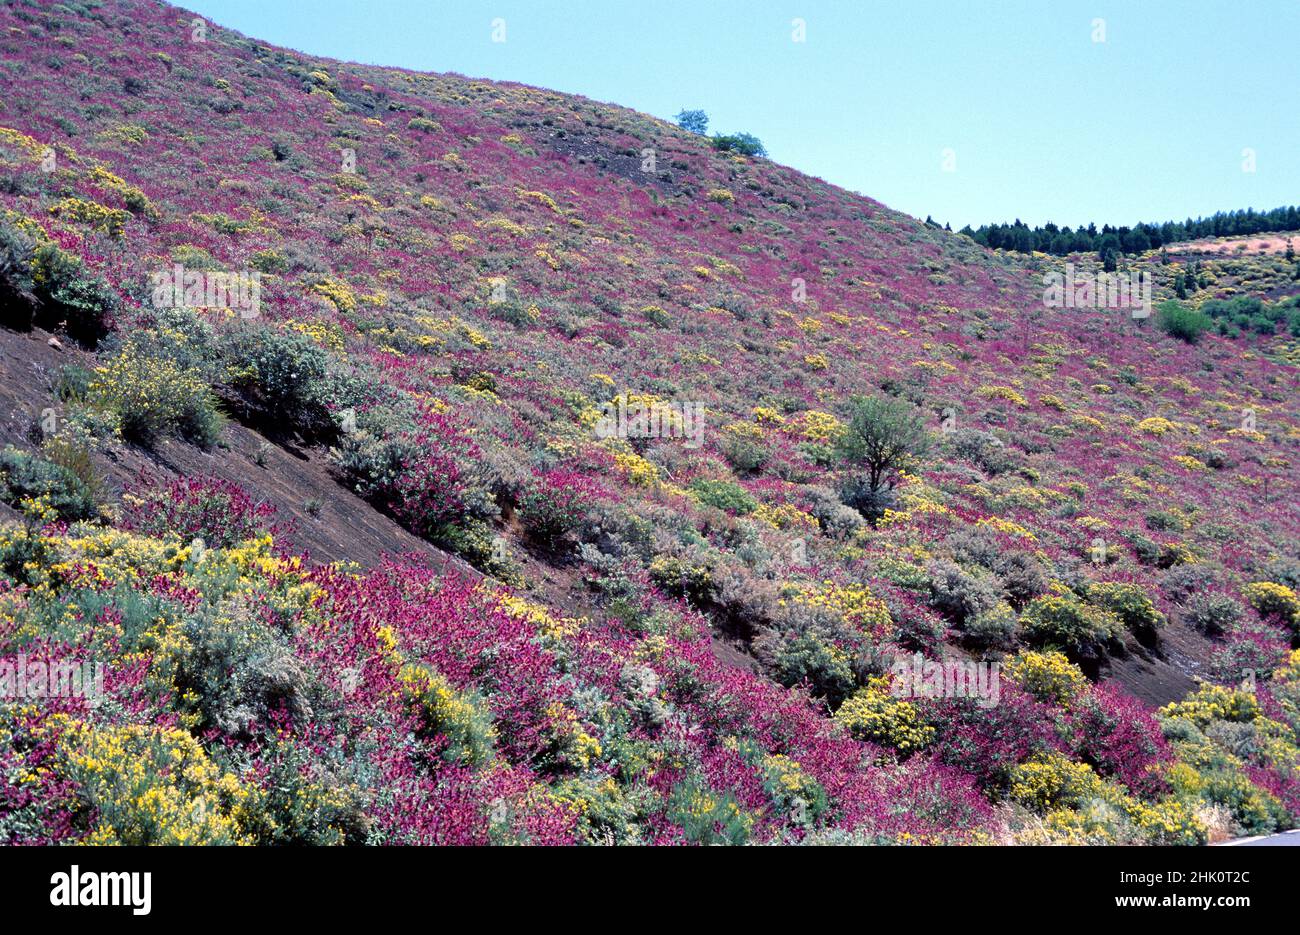 Shrubby community dominated by Canary Islands sage (Salvia canariensis). This photo was taken in Gran Canaria, Canary Islands, Spain. Stock Photo